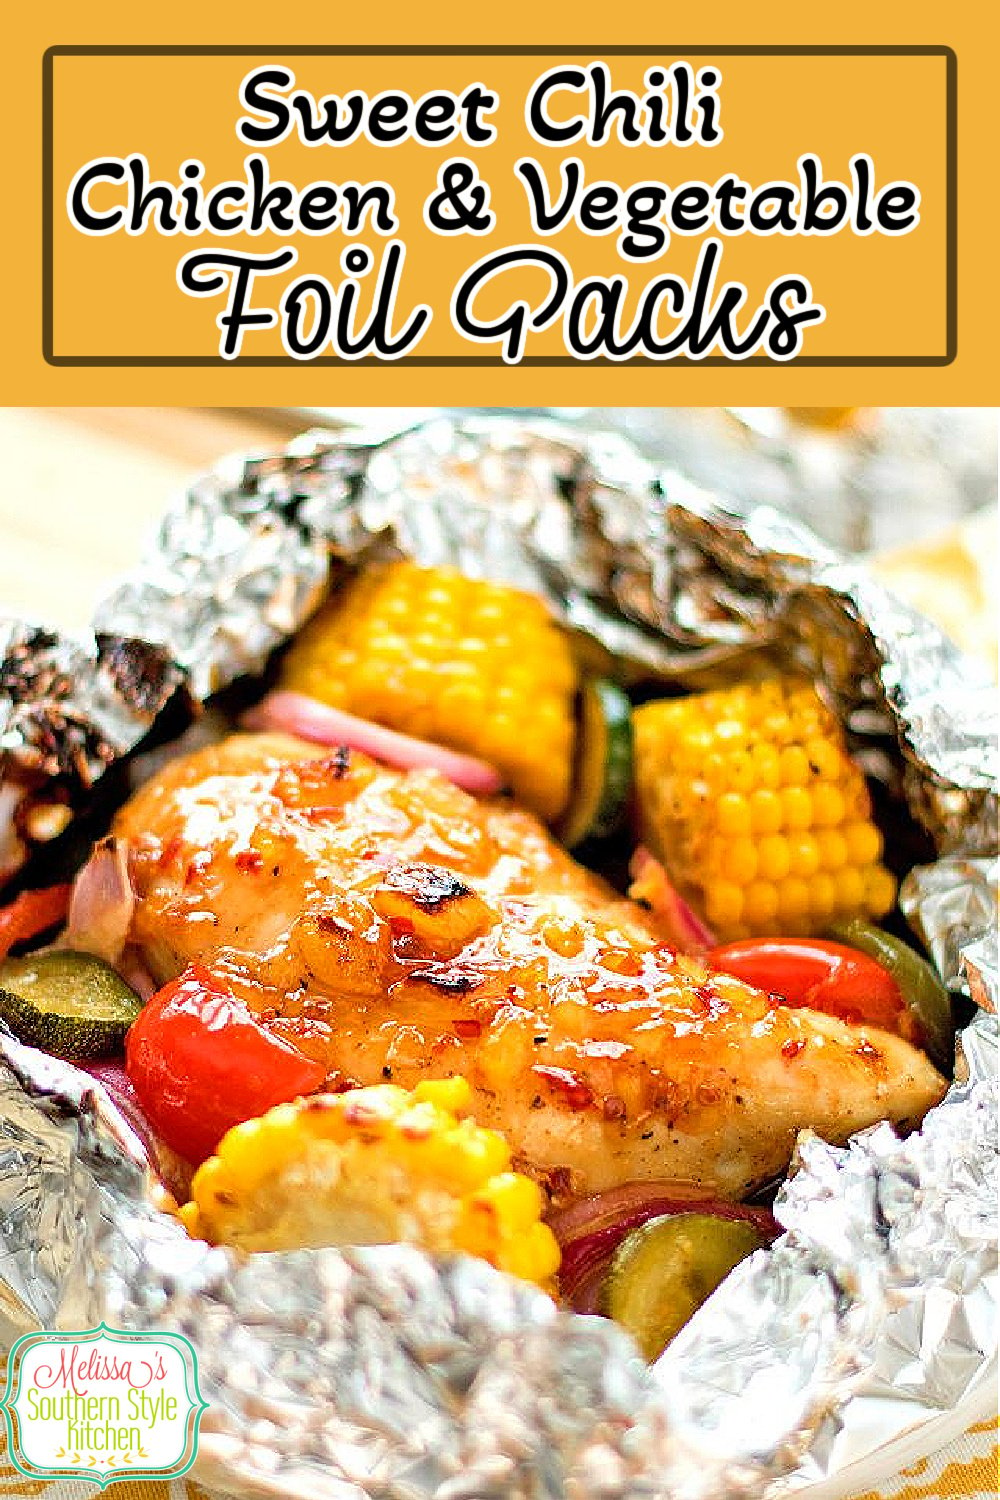 Make this sweet and spicy chicken foil packs for an all-in-one meal with easy clean-up, too! #chickenrecipes #chickenbreastrecipes #healthyfood #dinnerideas #foilpacks #campfiremeals #chicken #chili #southernfood #southernrecipes via @melissasssk